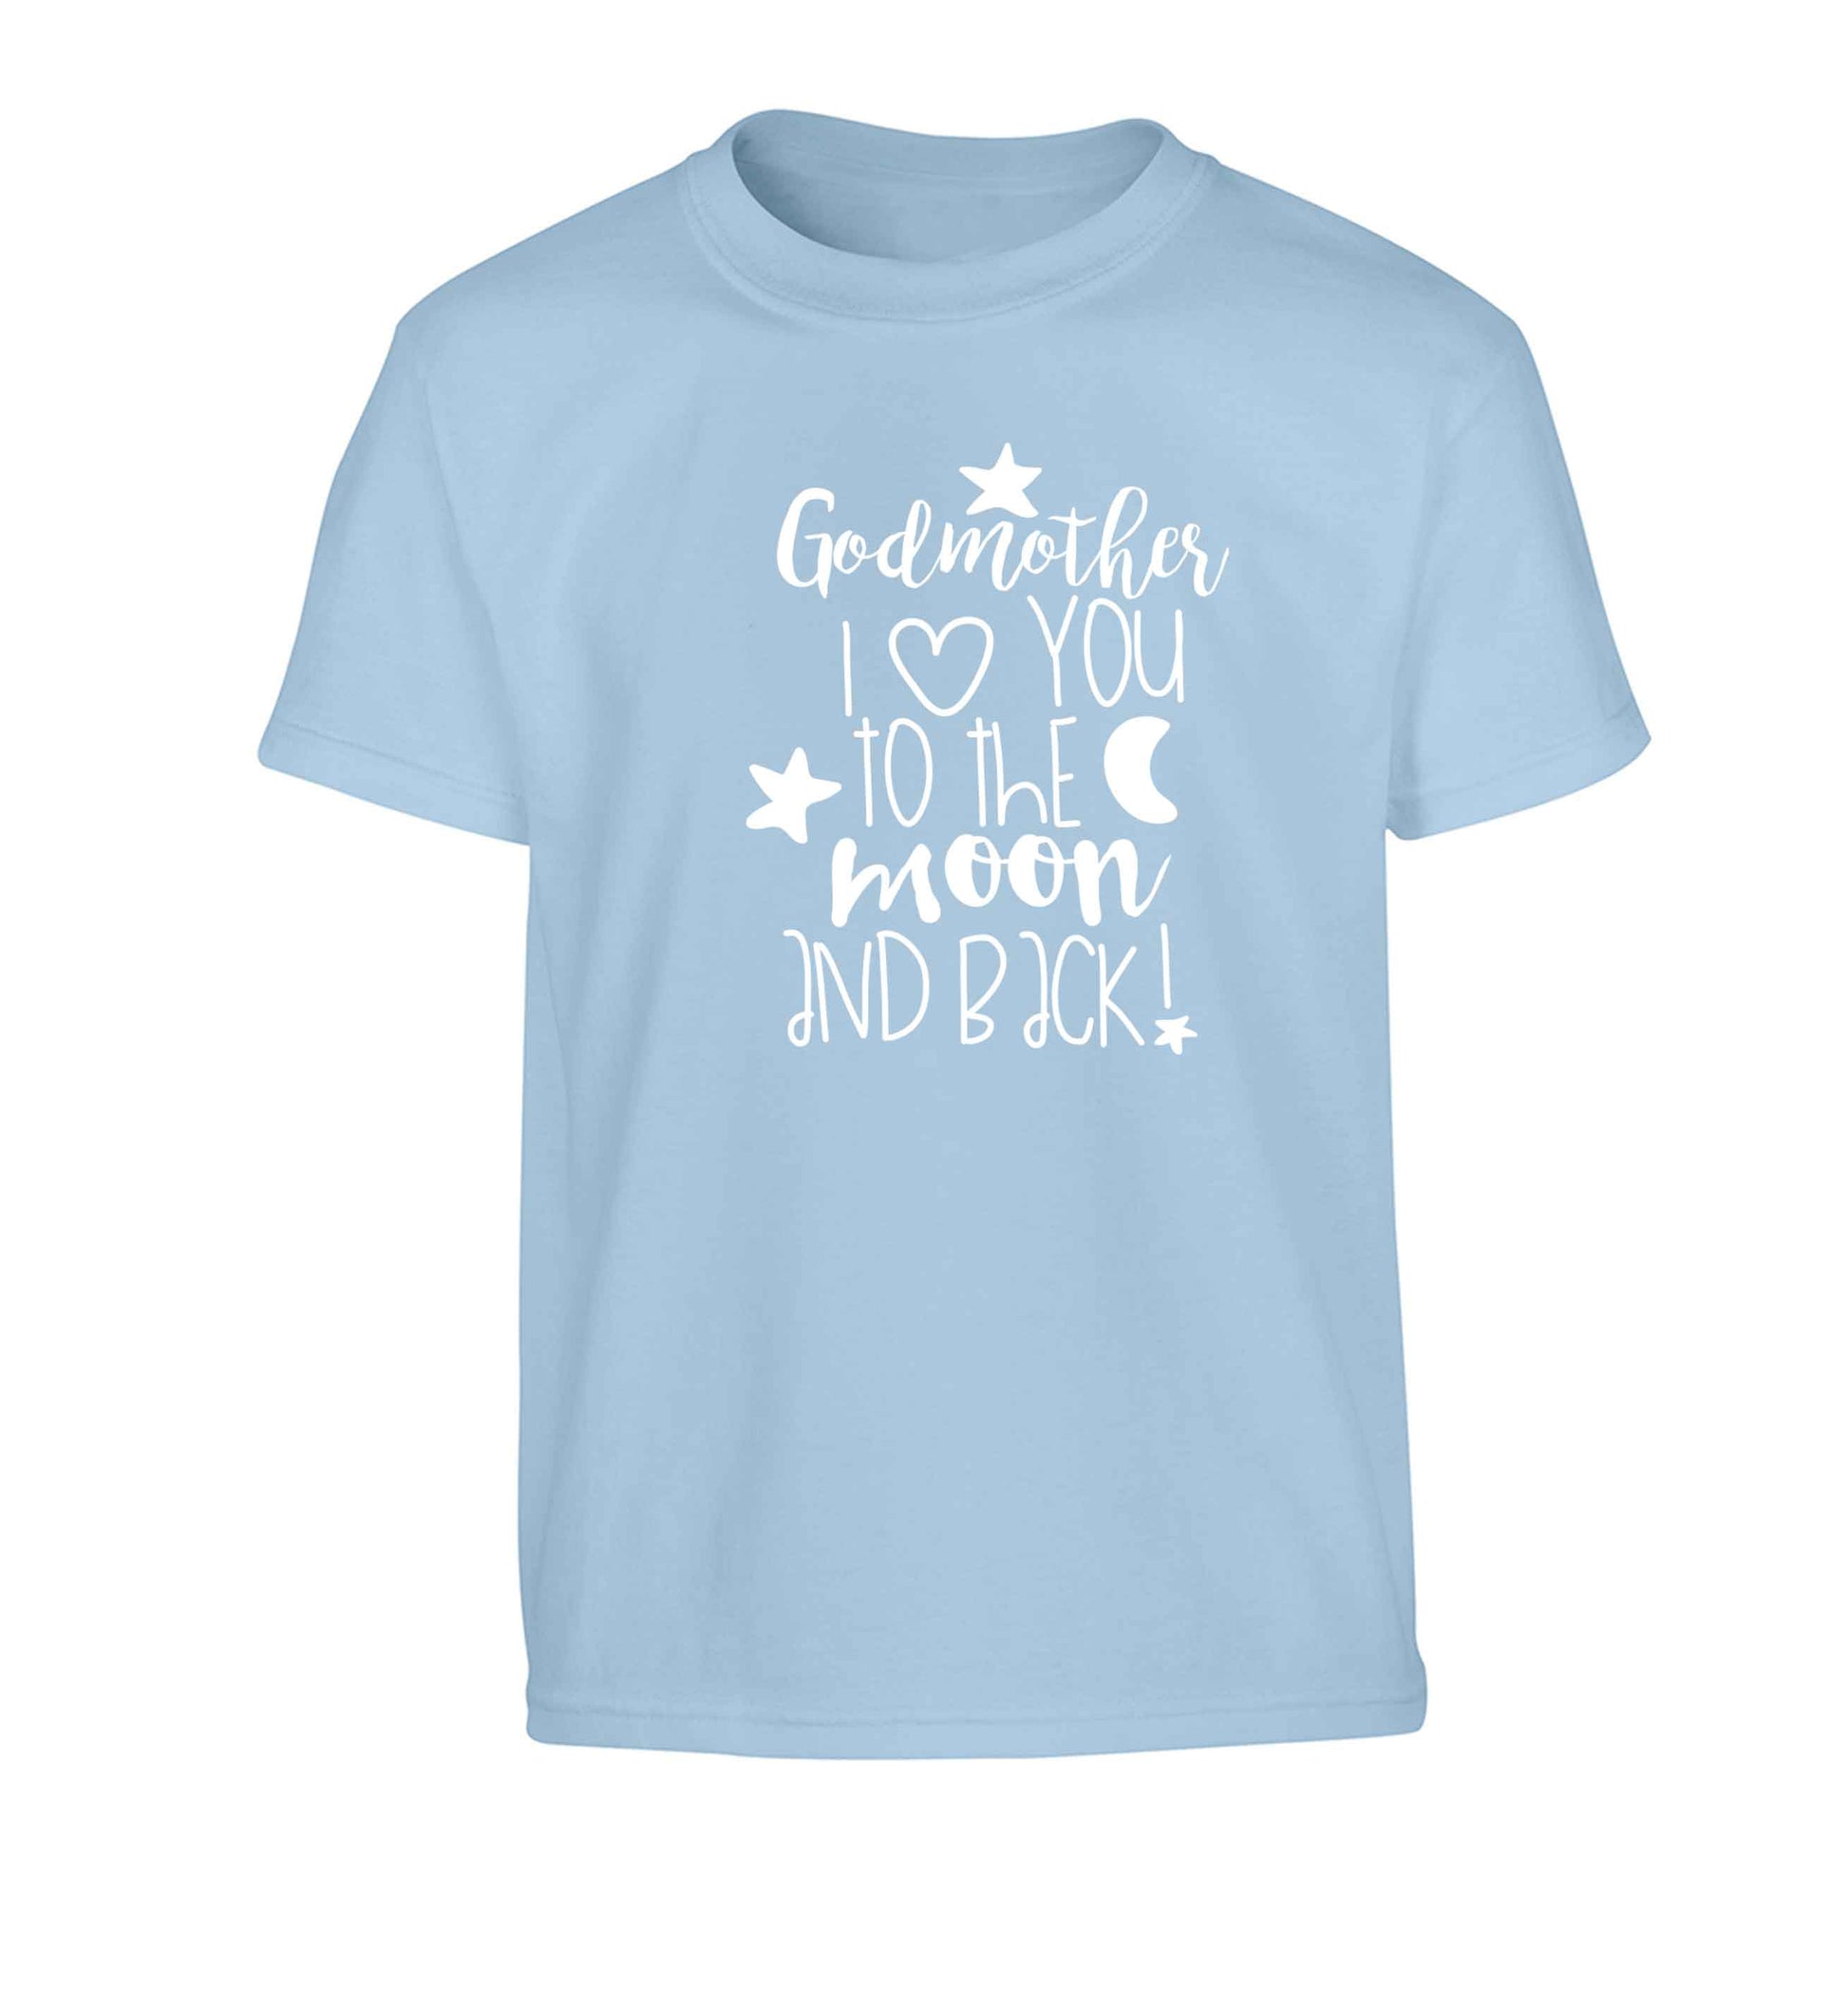 Godmother I love you to the moon and back Children's light blue Tshirt 12-13 Years